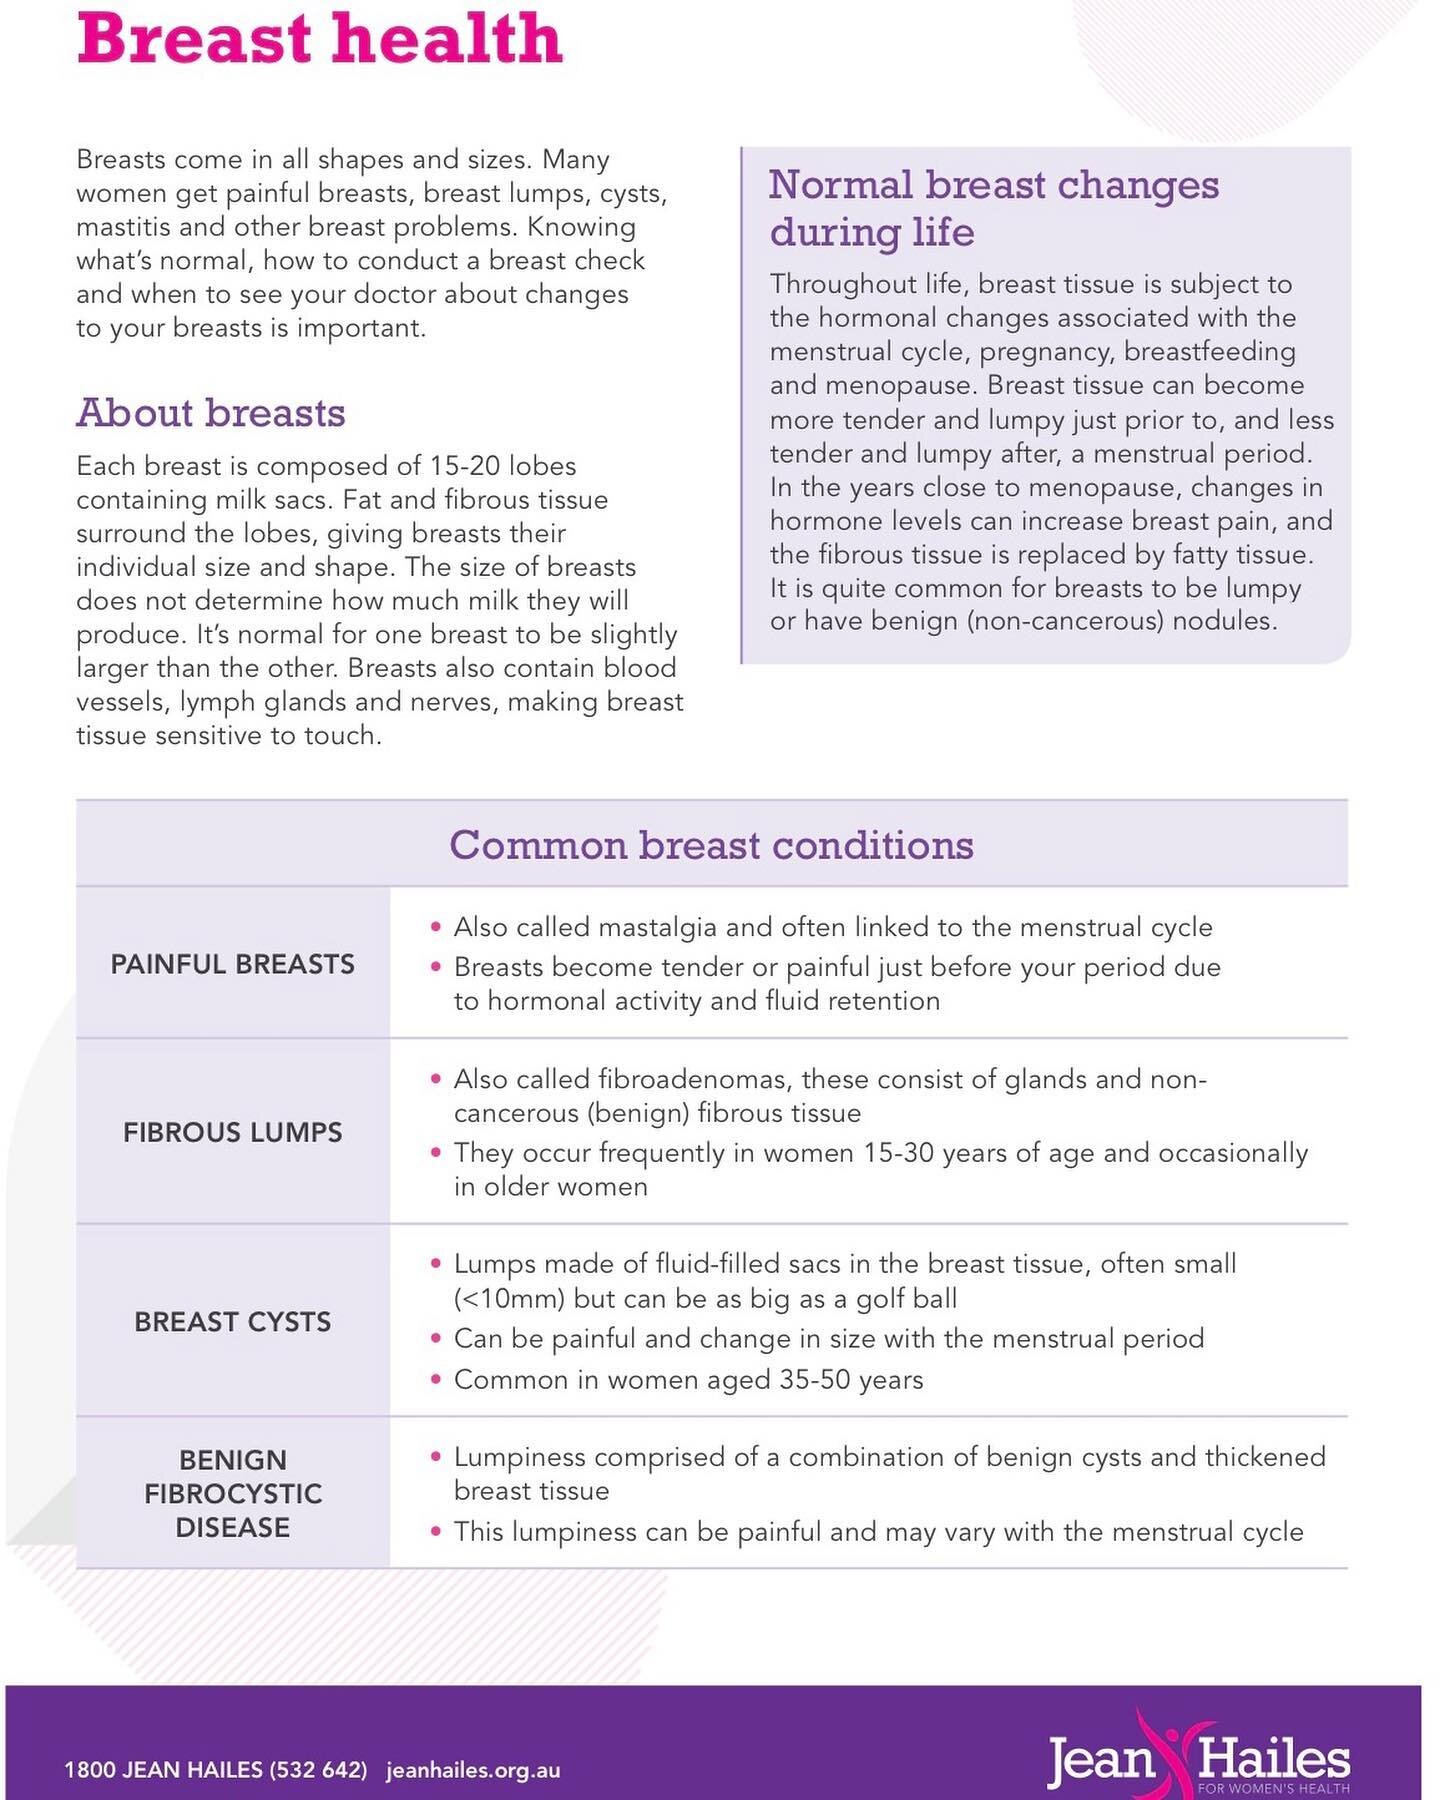 Hey Ladies- todays fact sheet is about Breasts: 🌸👀👀👀🌸
Aka Boobs, Boobies, Boozies, bosoms, Bristol's -  we all have them and need to take care of them and check them regularly ( self check)  and 
from  the age of 50 ( 40 if you have a strong fam